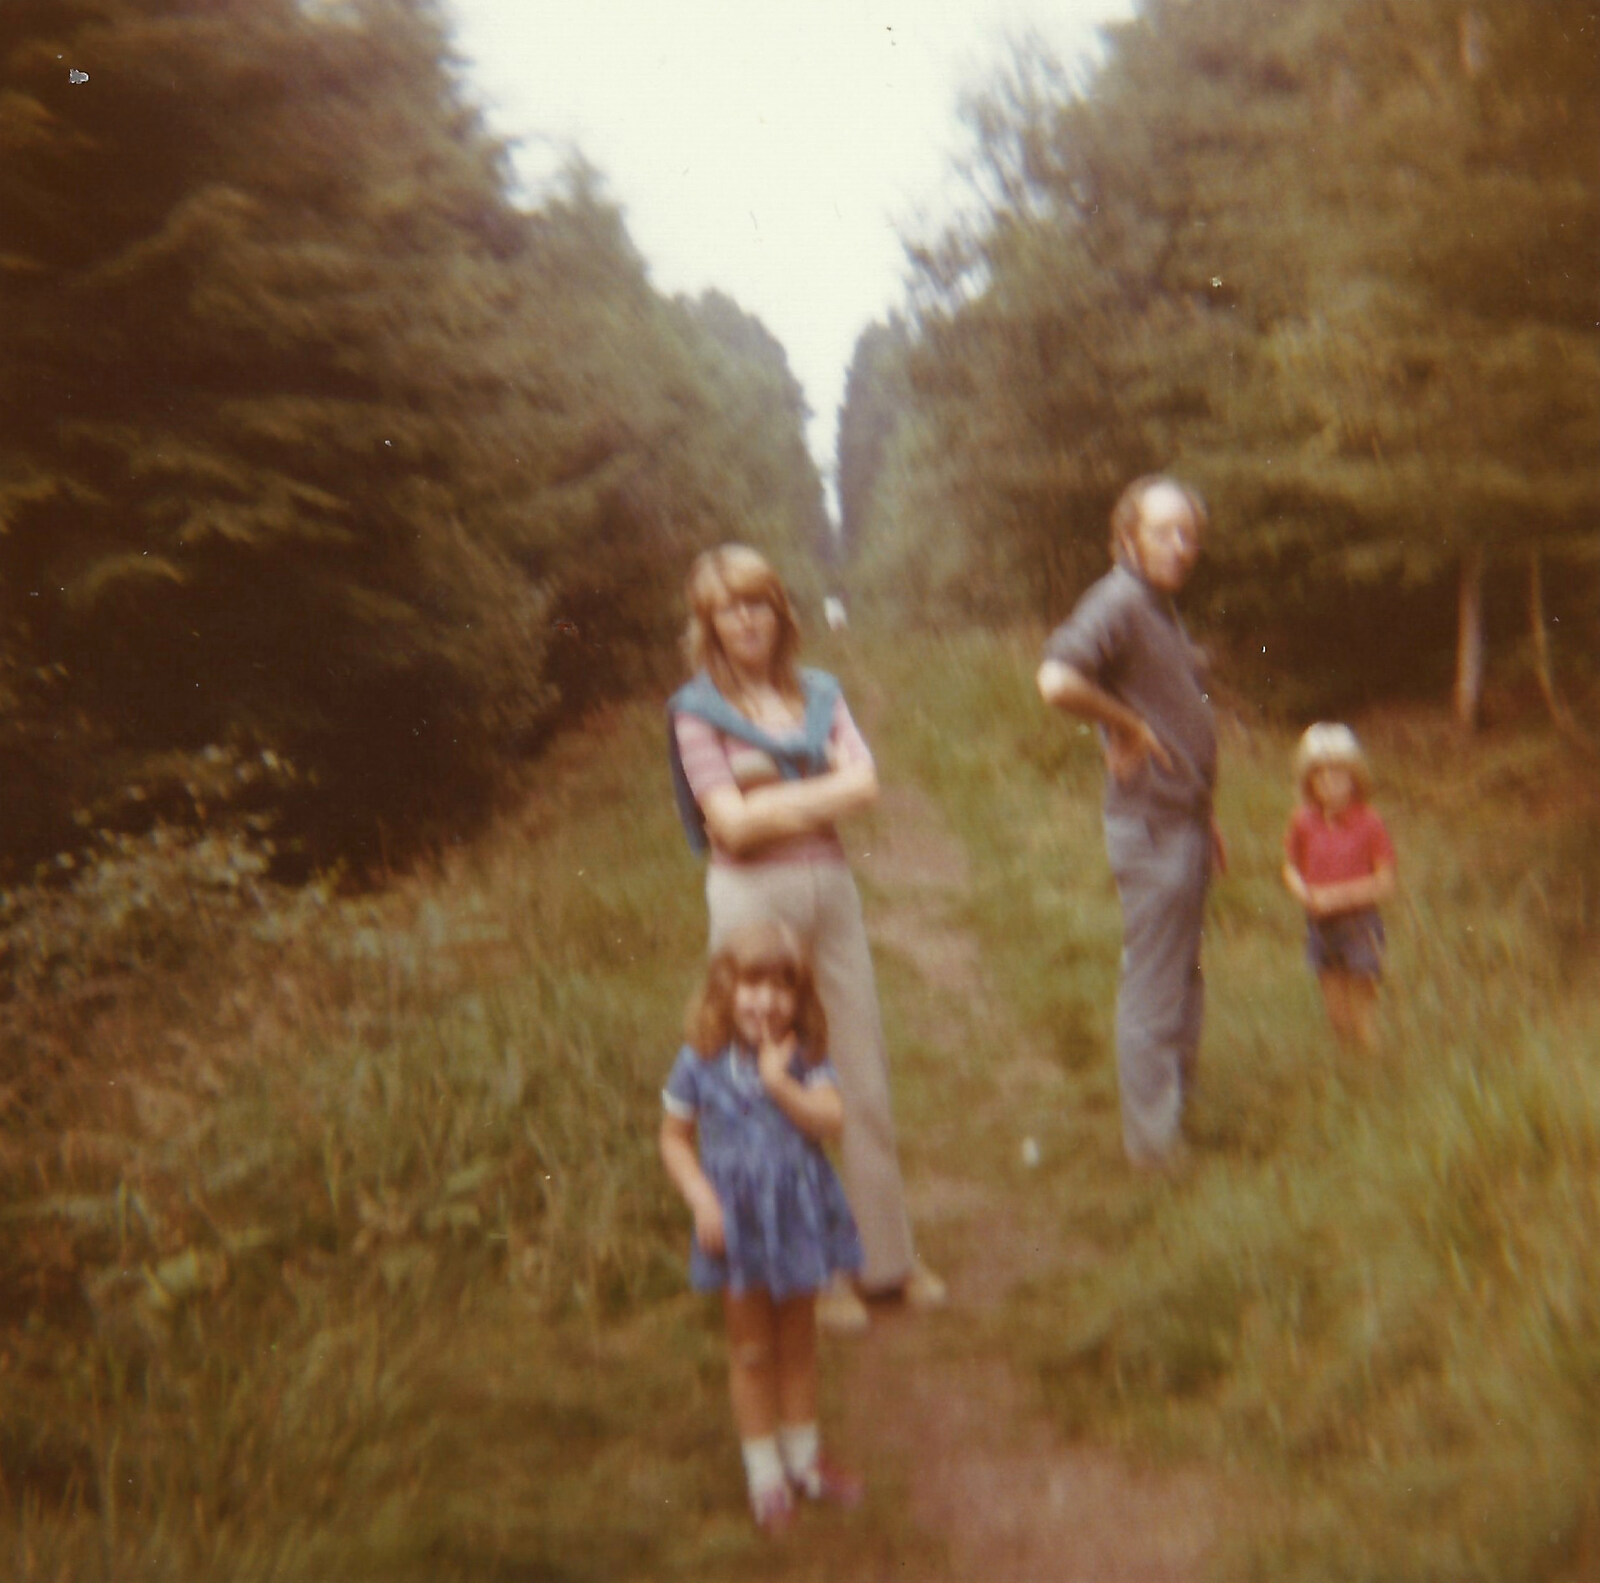 In the woods somewhere, 1971 from Family History: The 1970s, Timperley and Sandbach, Cheshire - 24th January 2020